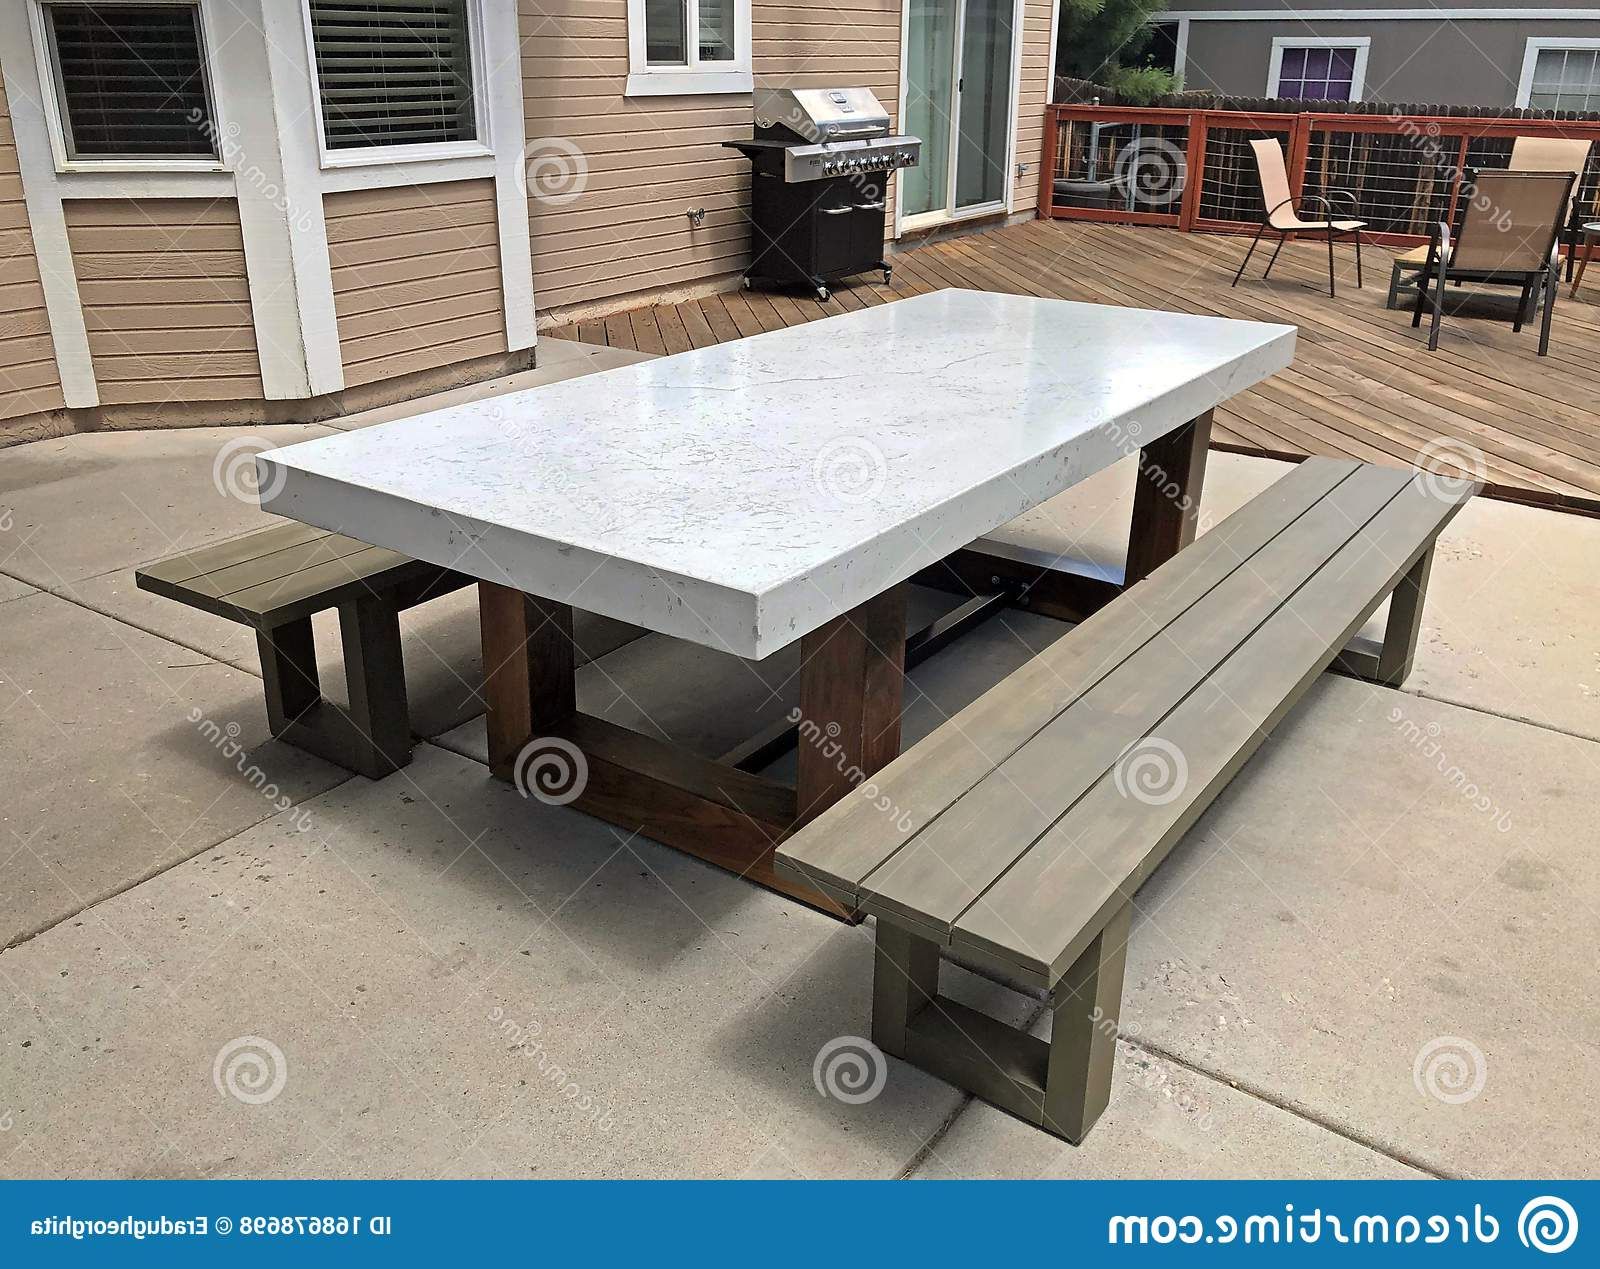 2019 Marble Outdoor Tables Pertaining To Design And Furniture In Modern Patio With Marble Table In The Foreground  Stock Photo – Image Of Building, Apartment:  (View 6 of 15)